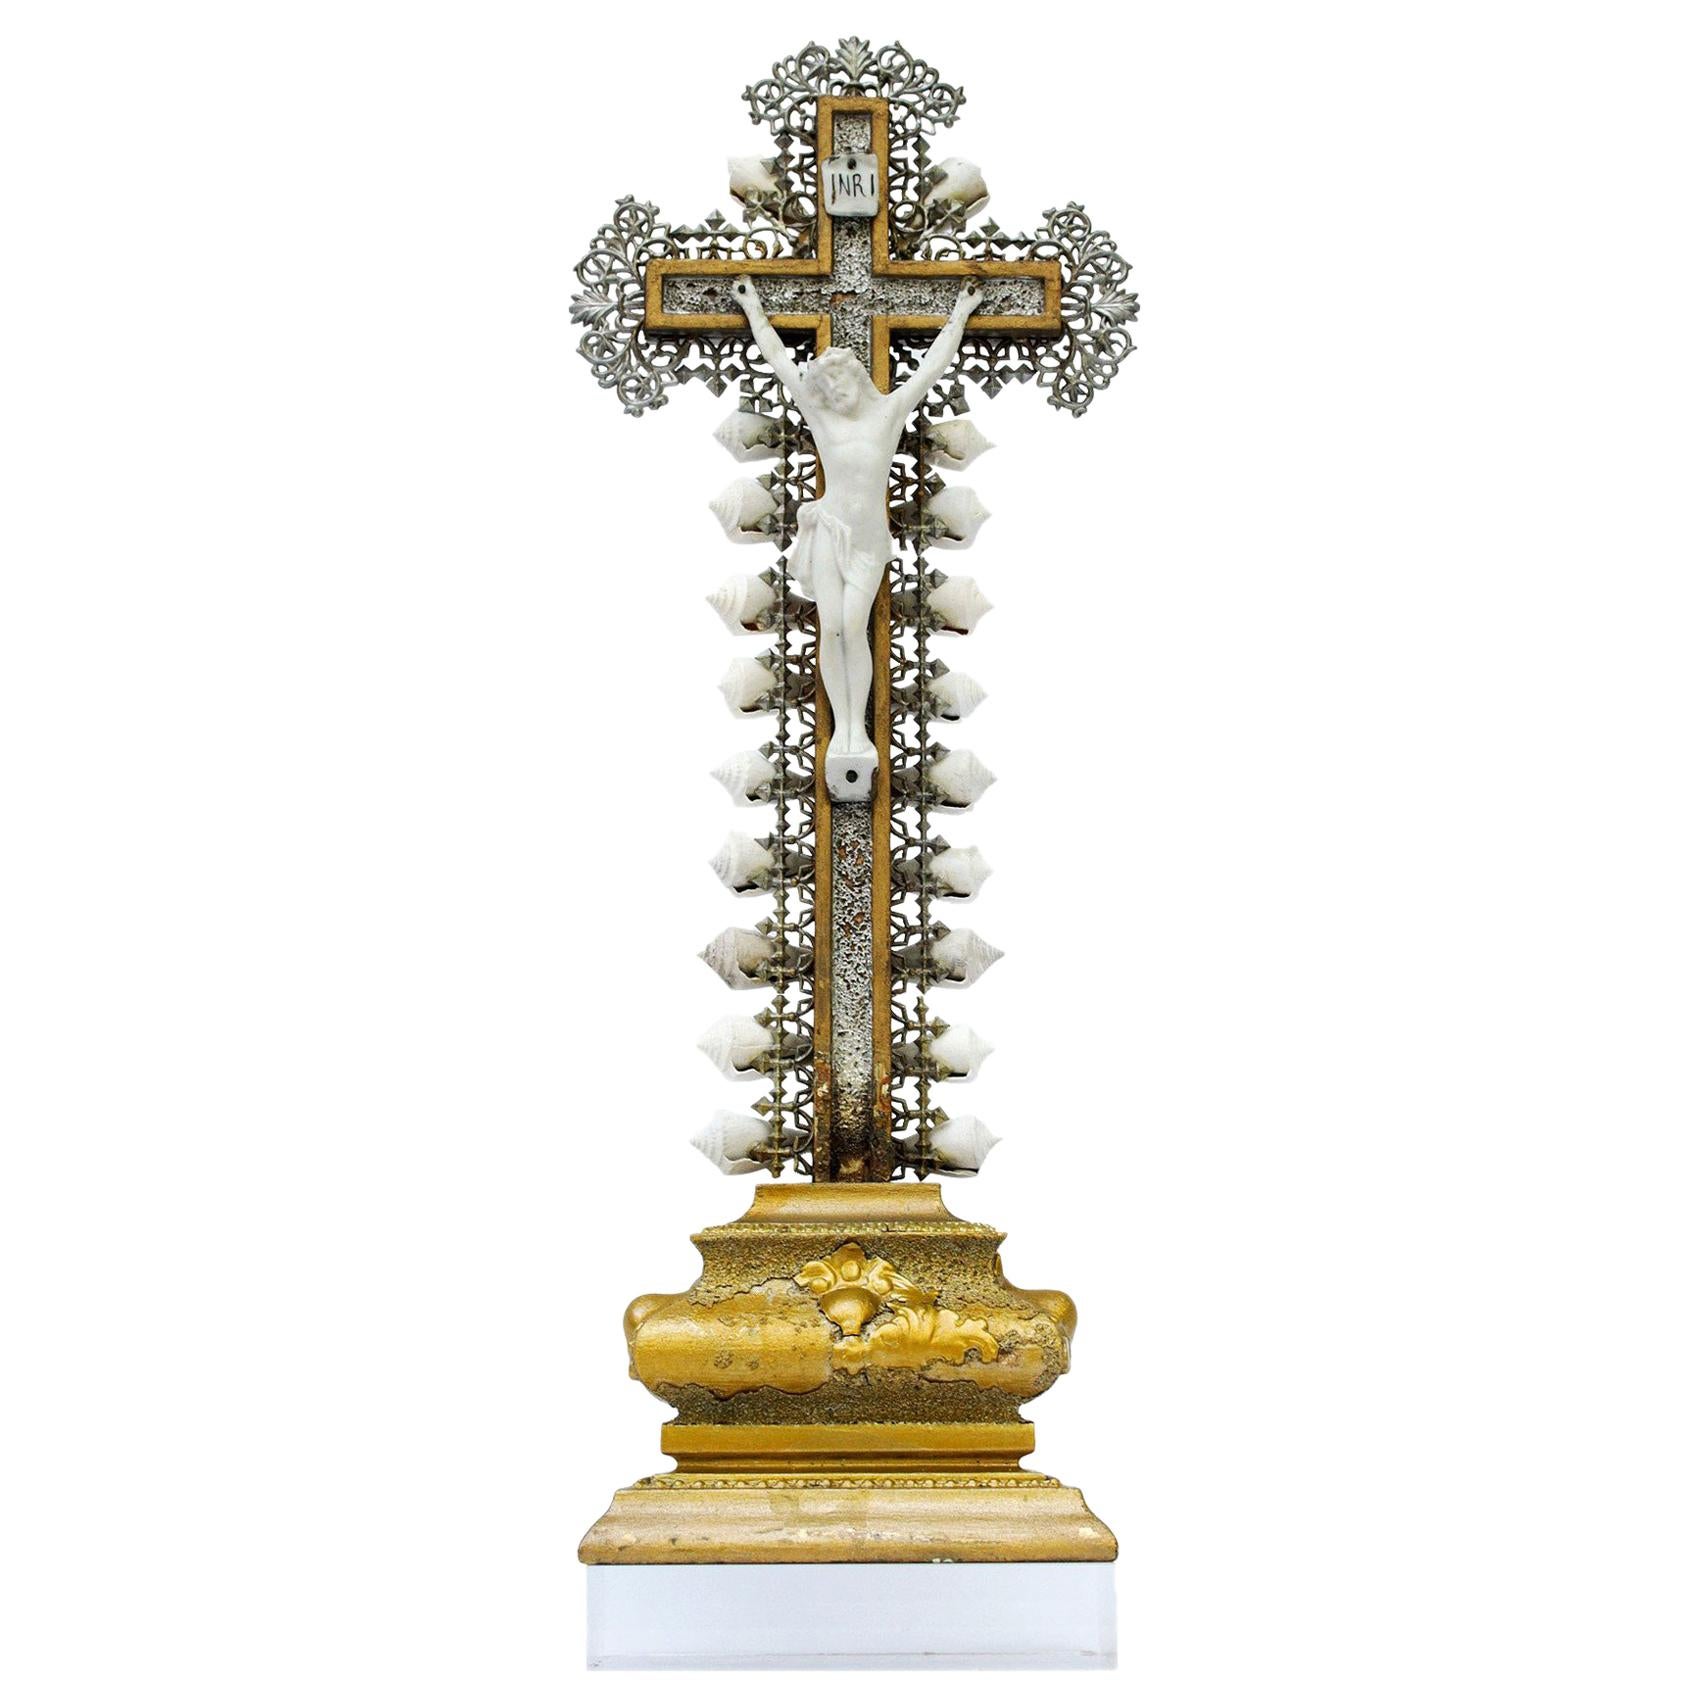 Decorated 19th Century French Crucifix and Bisque Corpus Christi